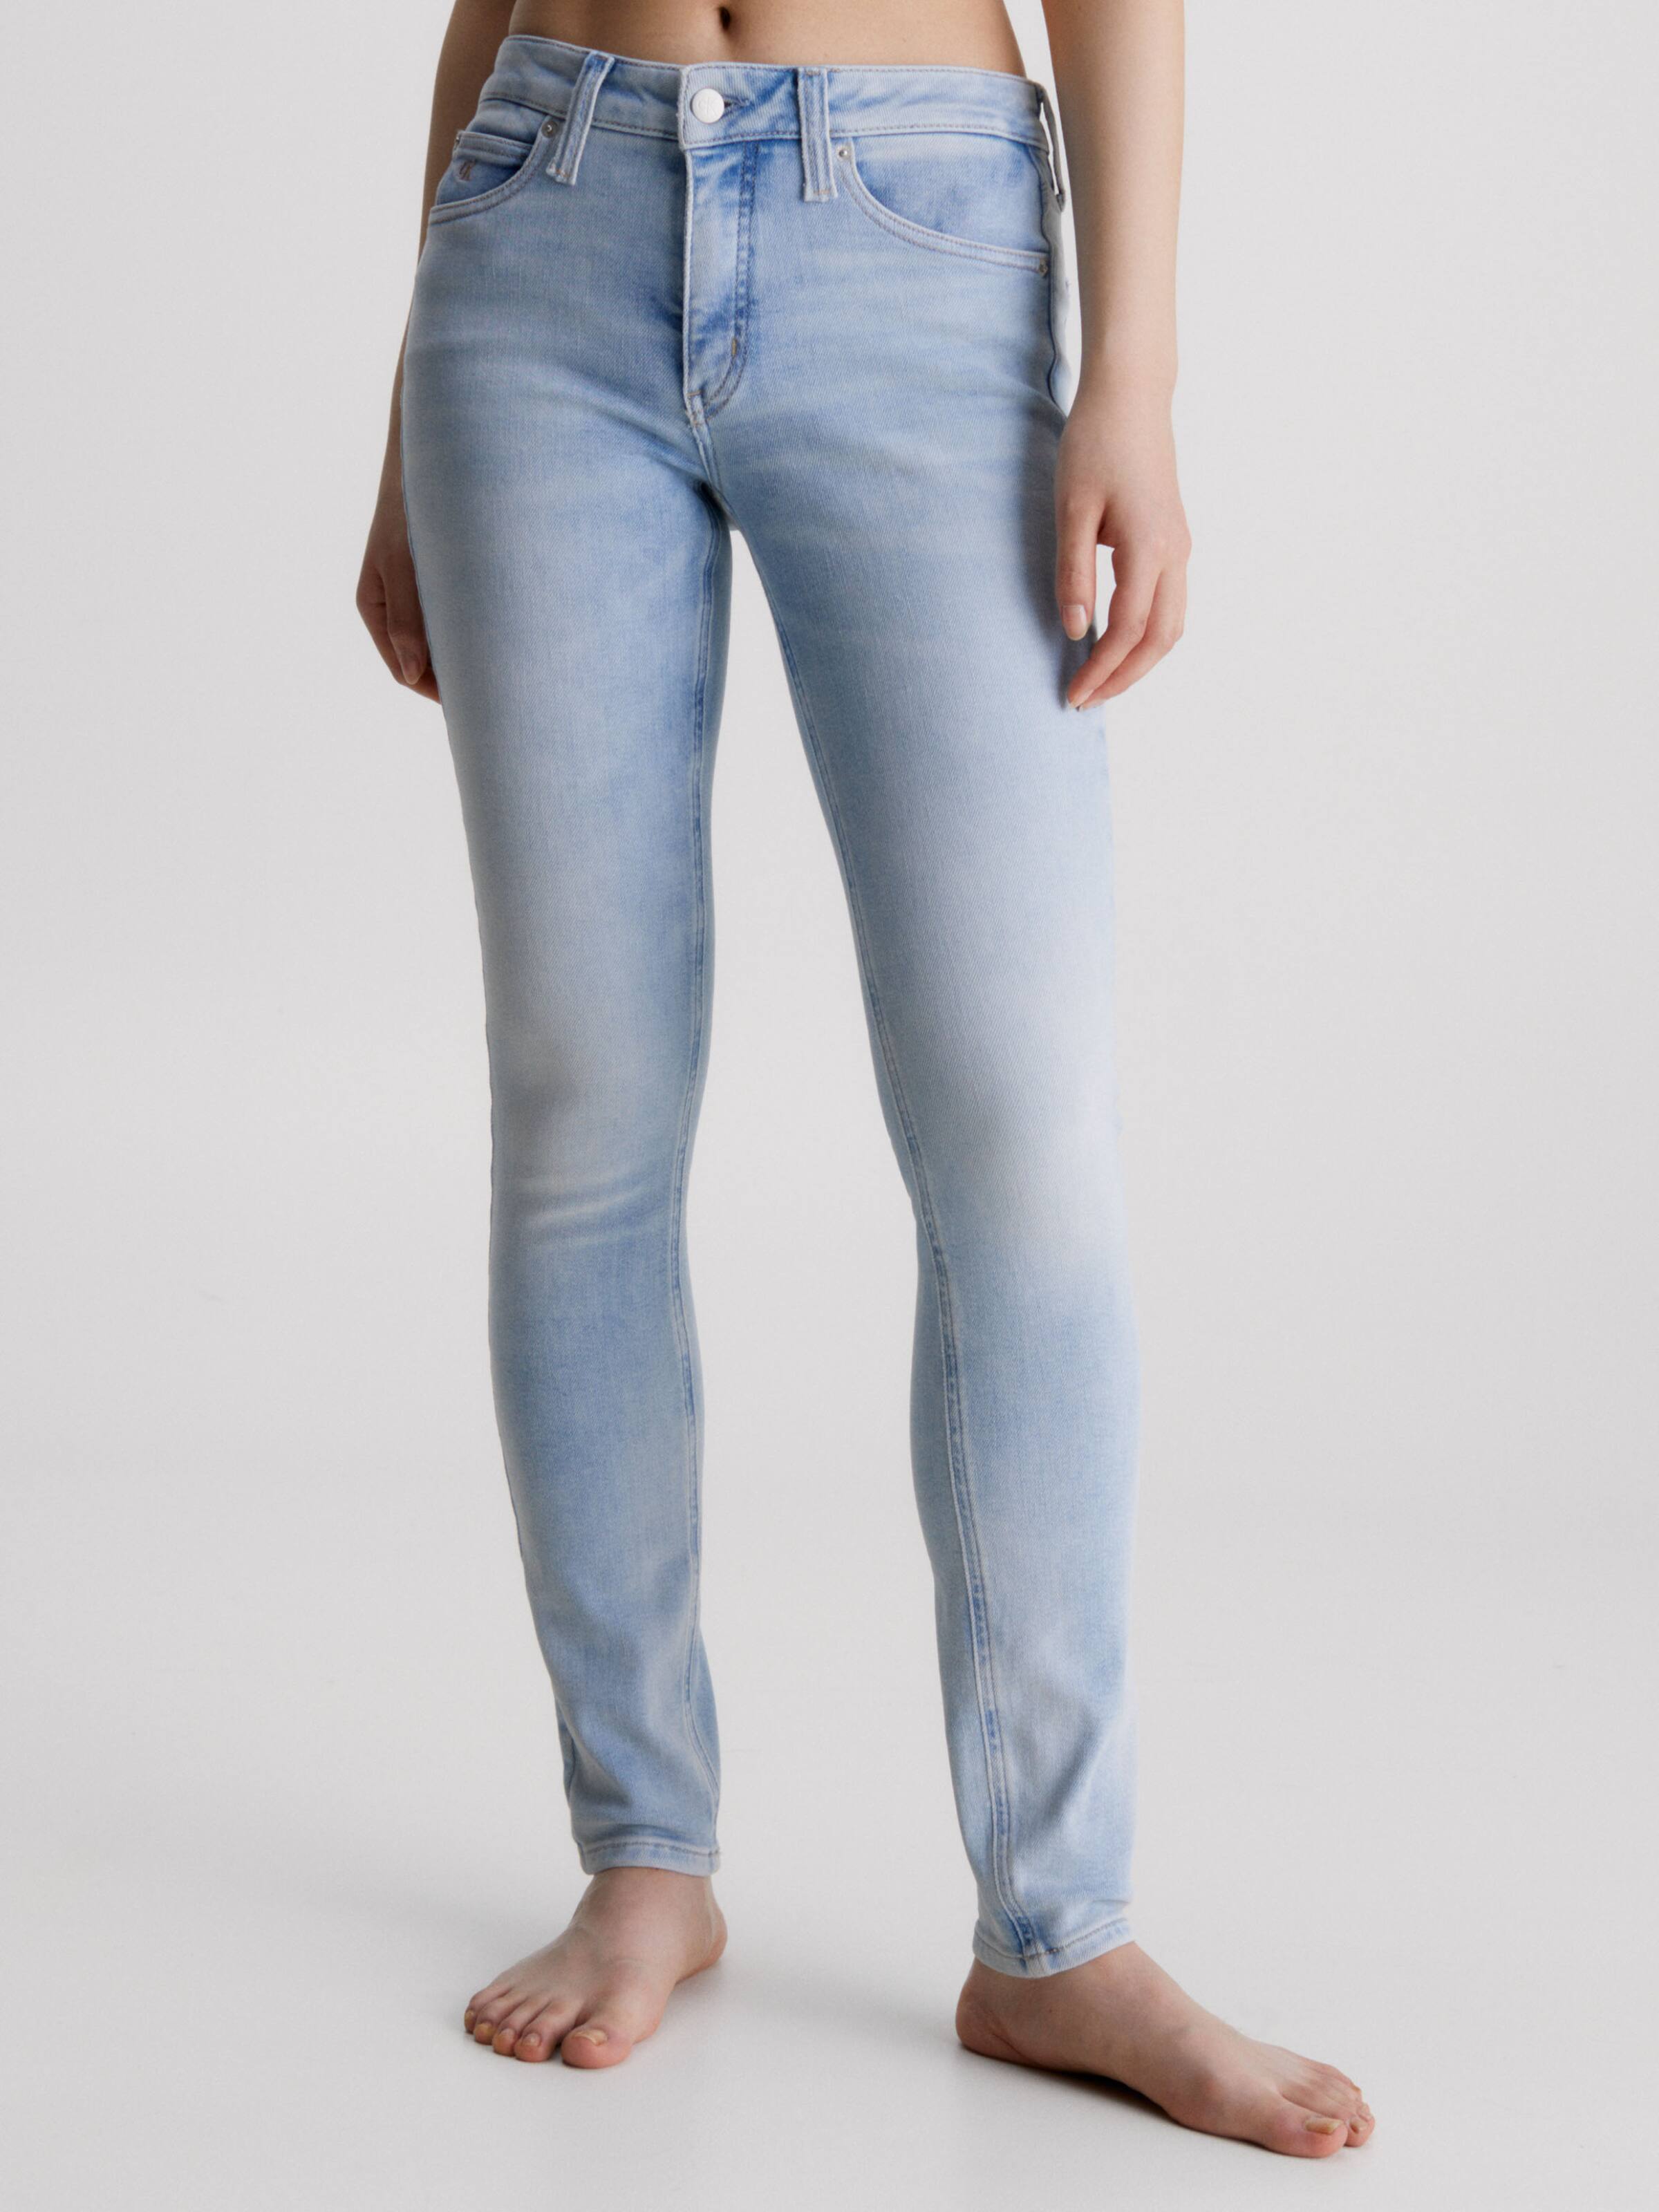 Relaxed Loose Fit Jogger Jeans - Light Blue Wash